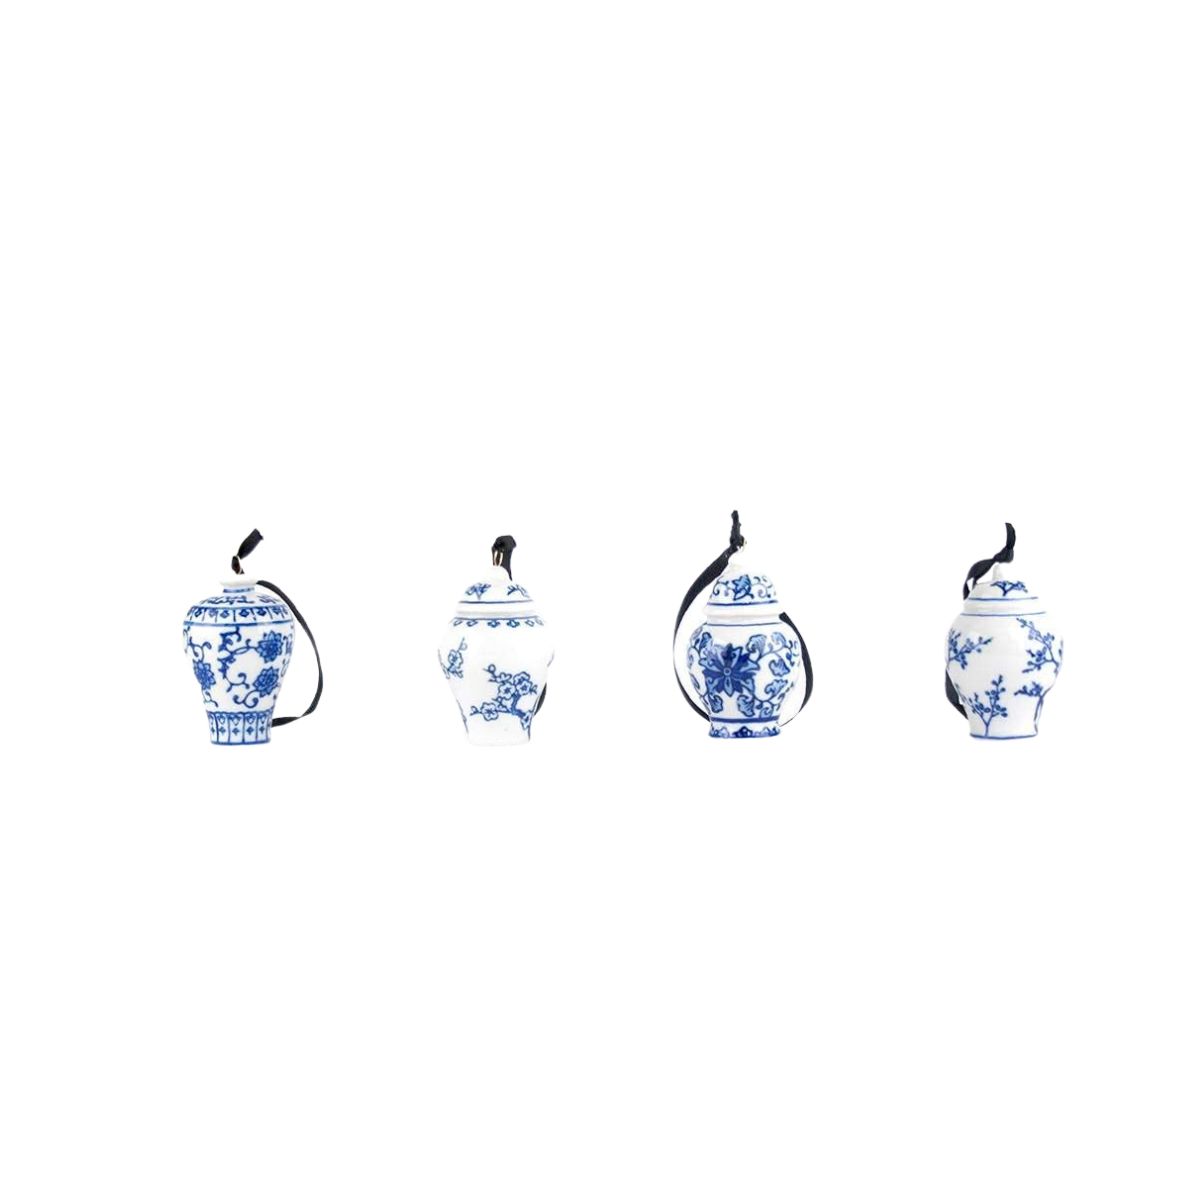 Blue and white ceramic tree Christmas decorations